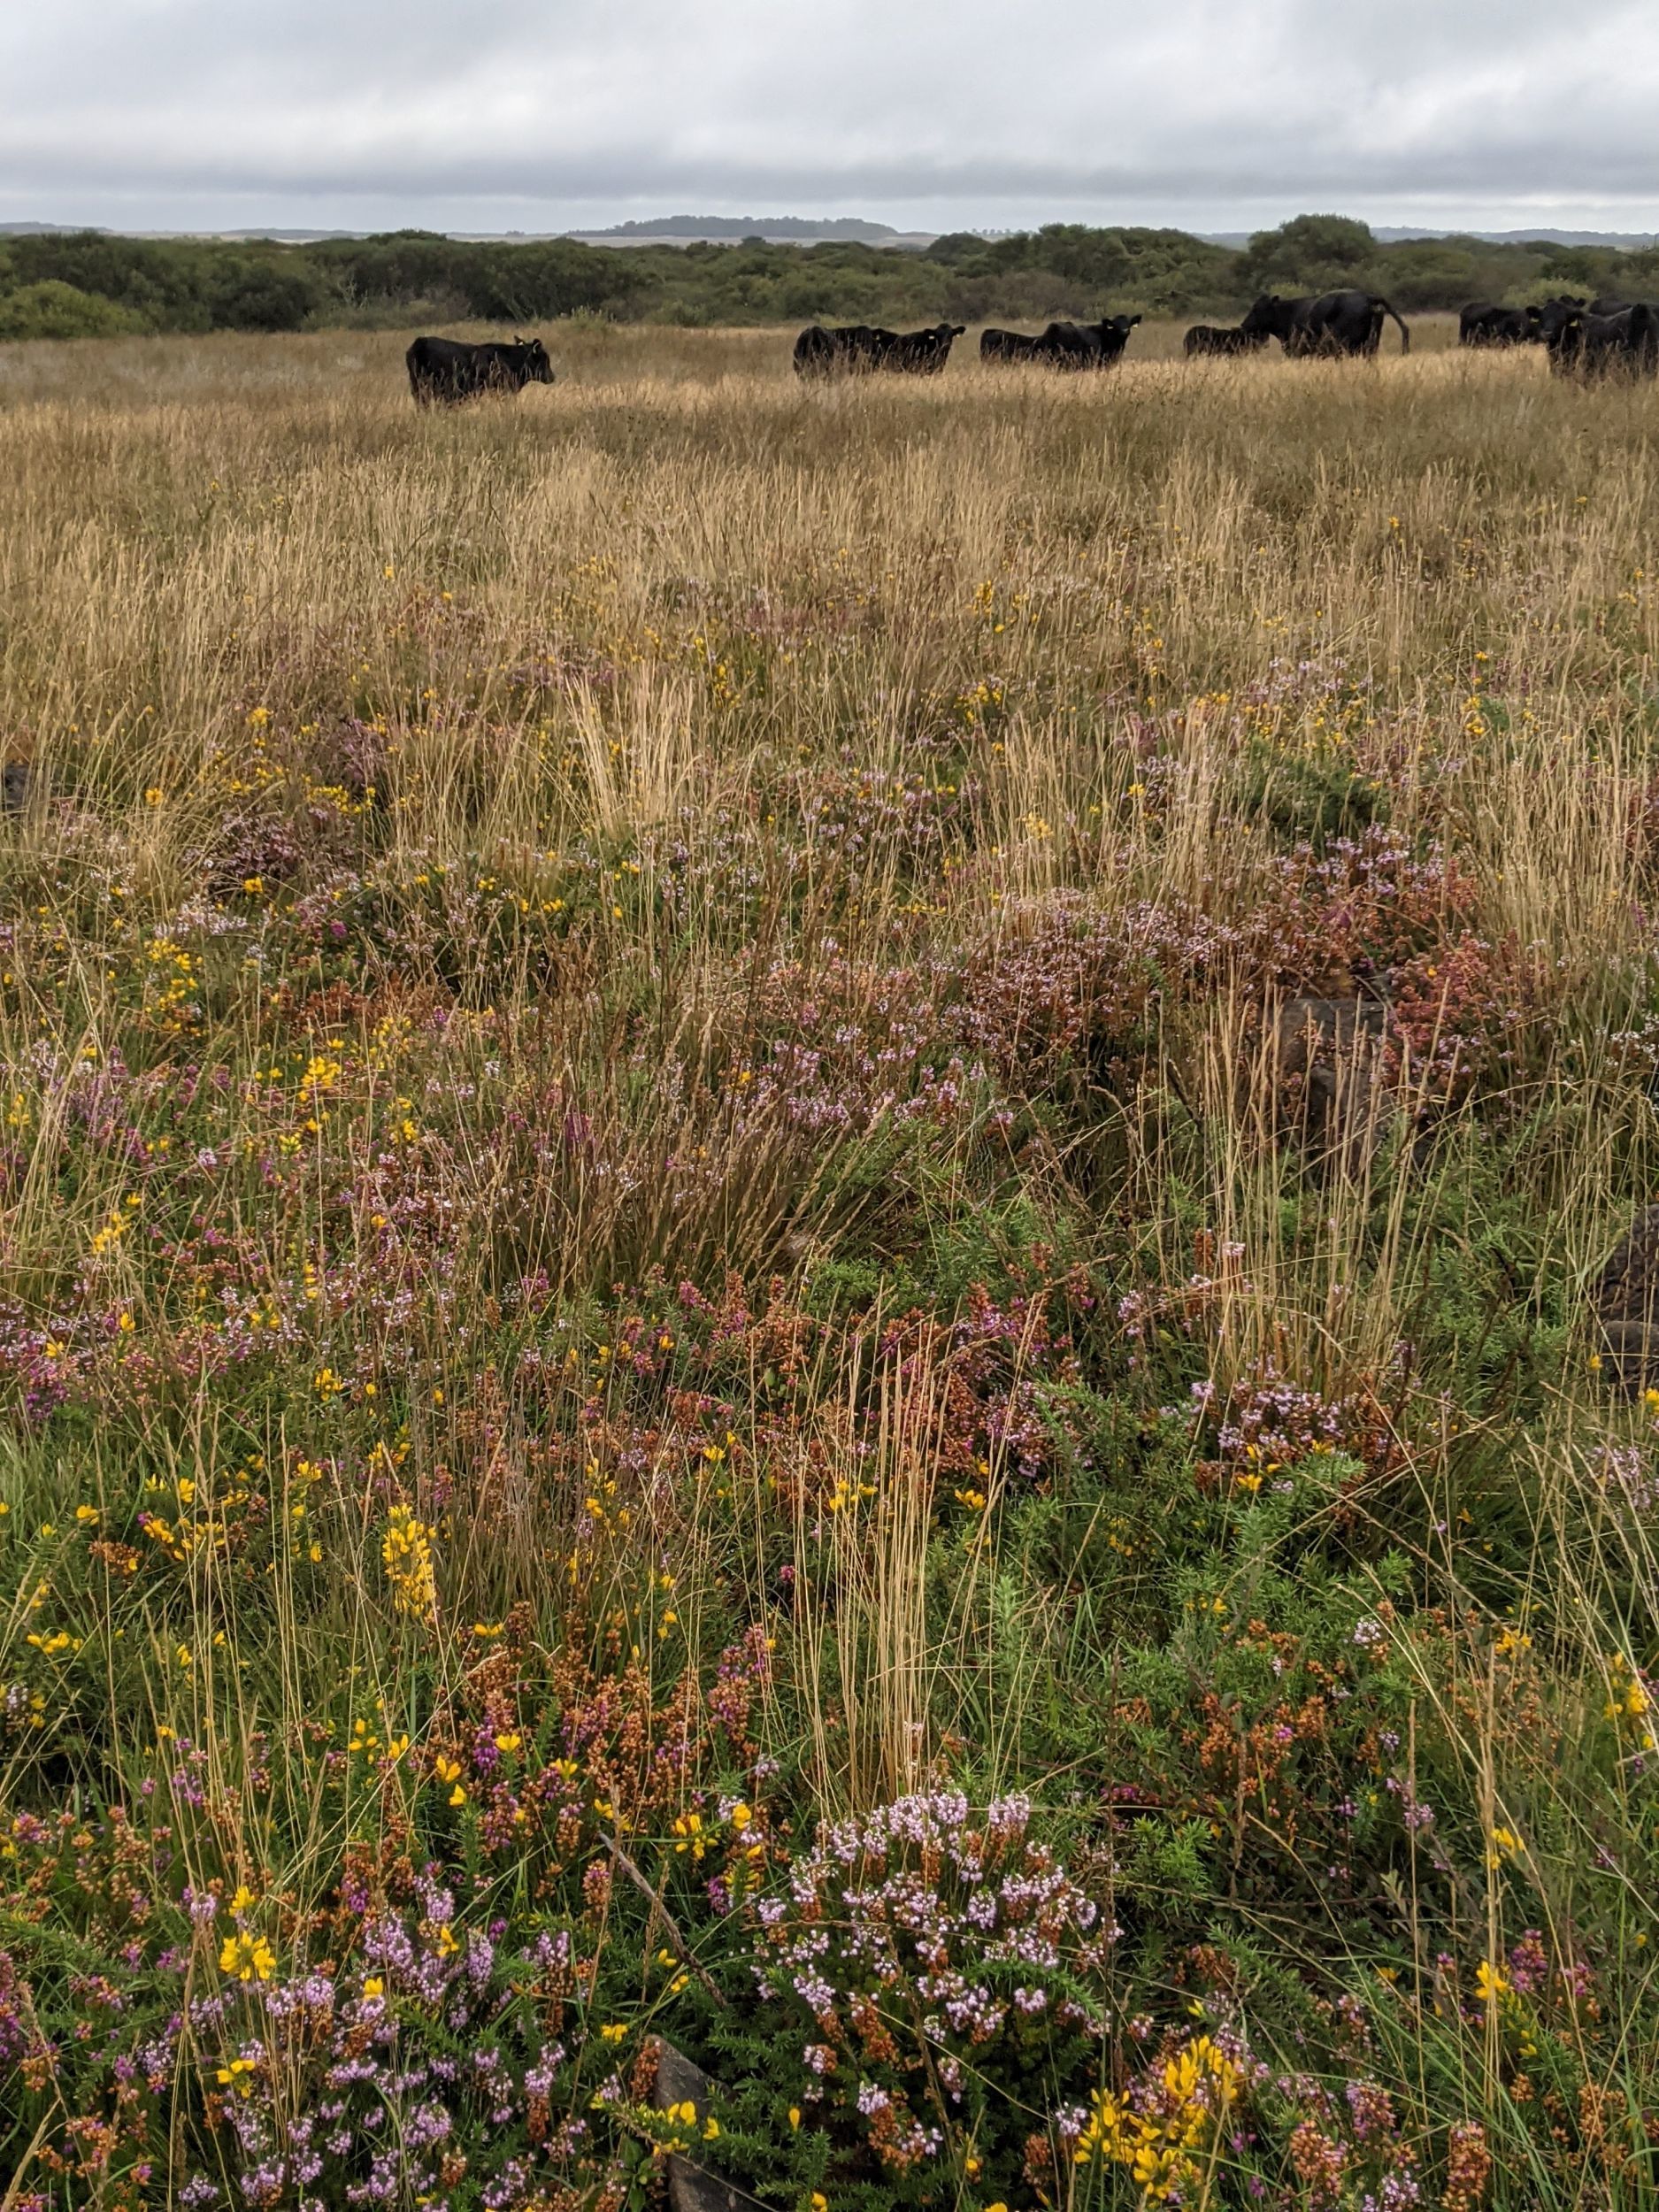 Grazing on coastland and heath was discussed